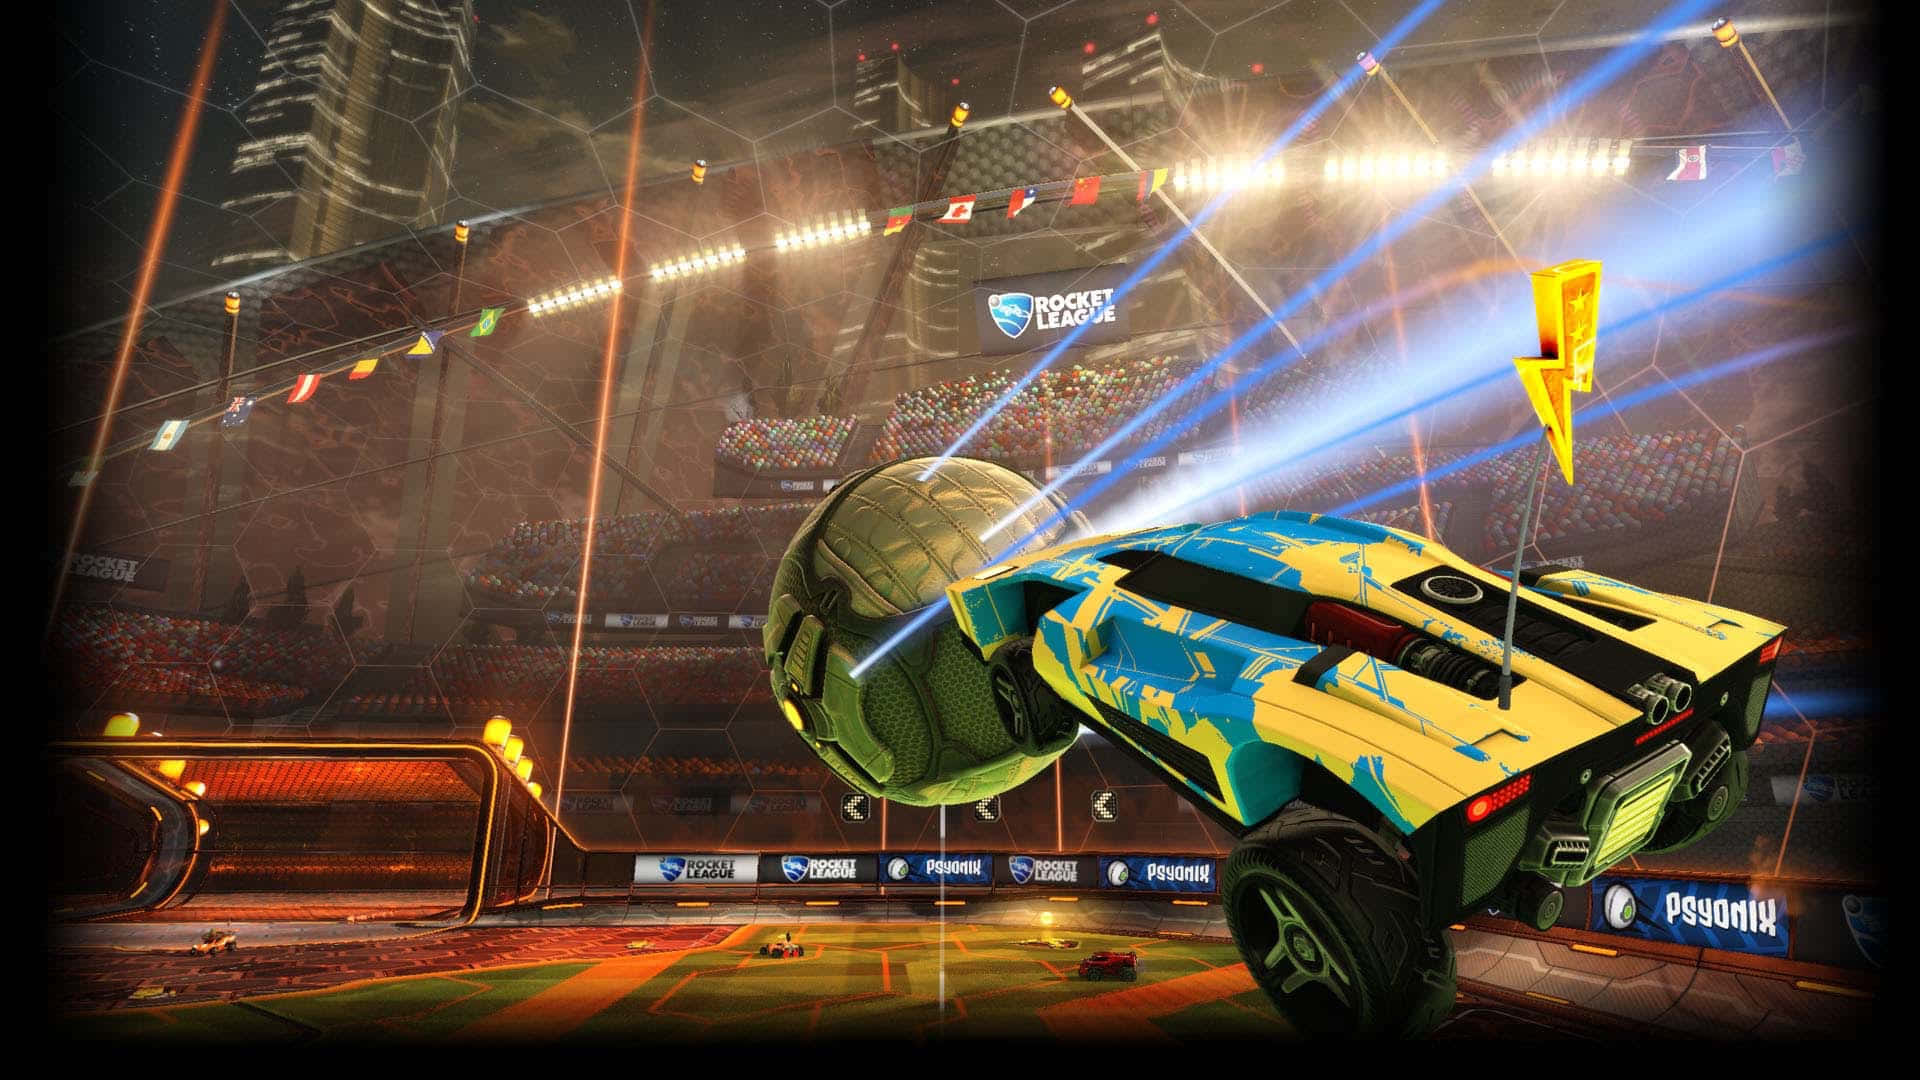 Feel the thrill of Rocket League in 1080p